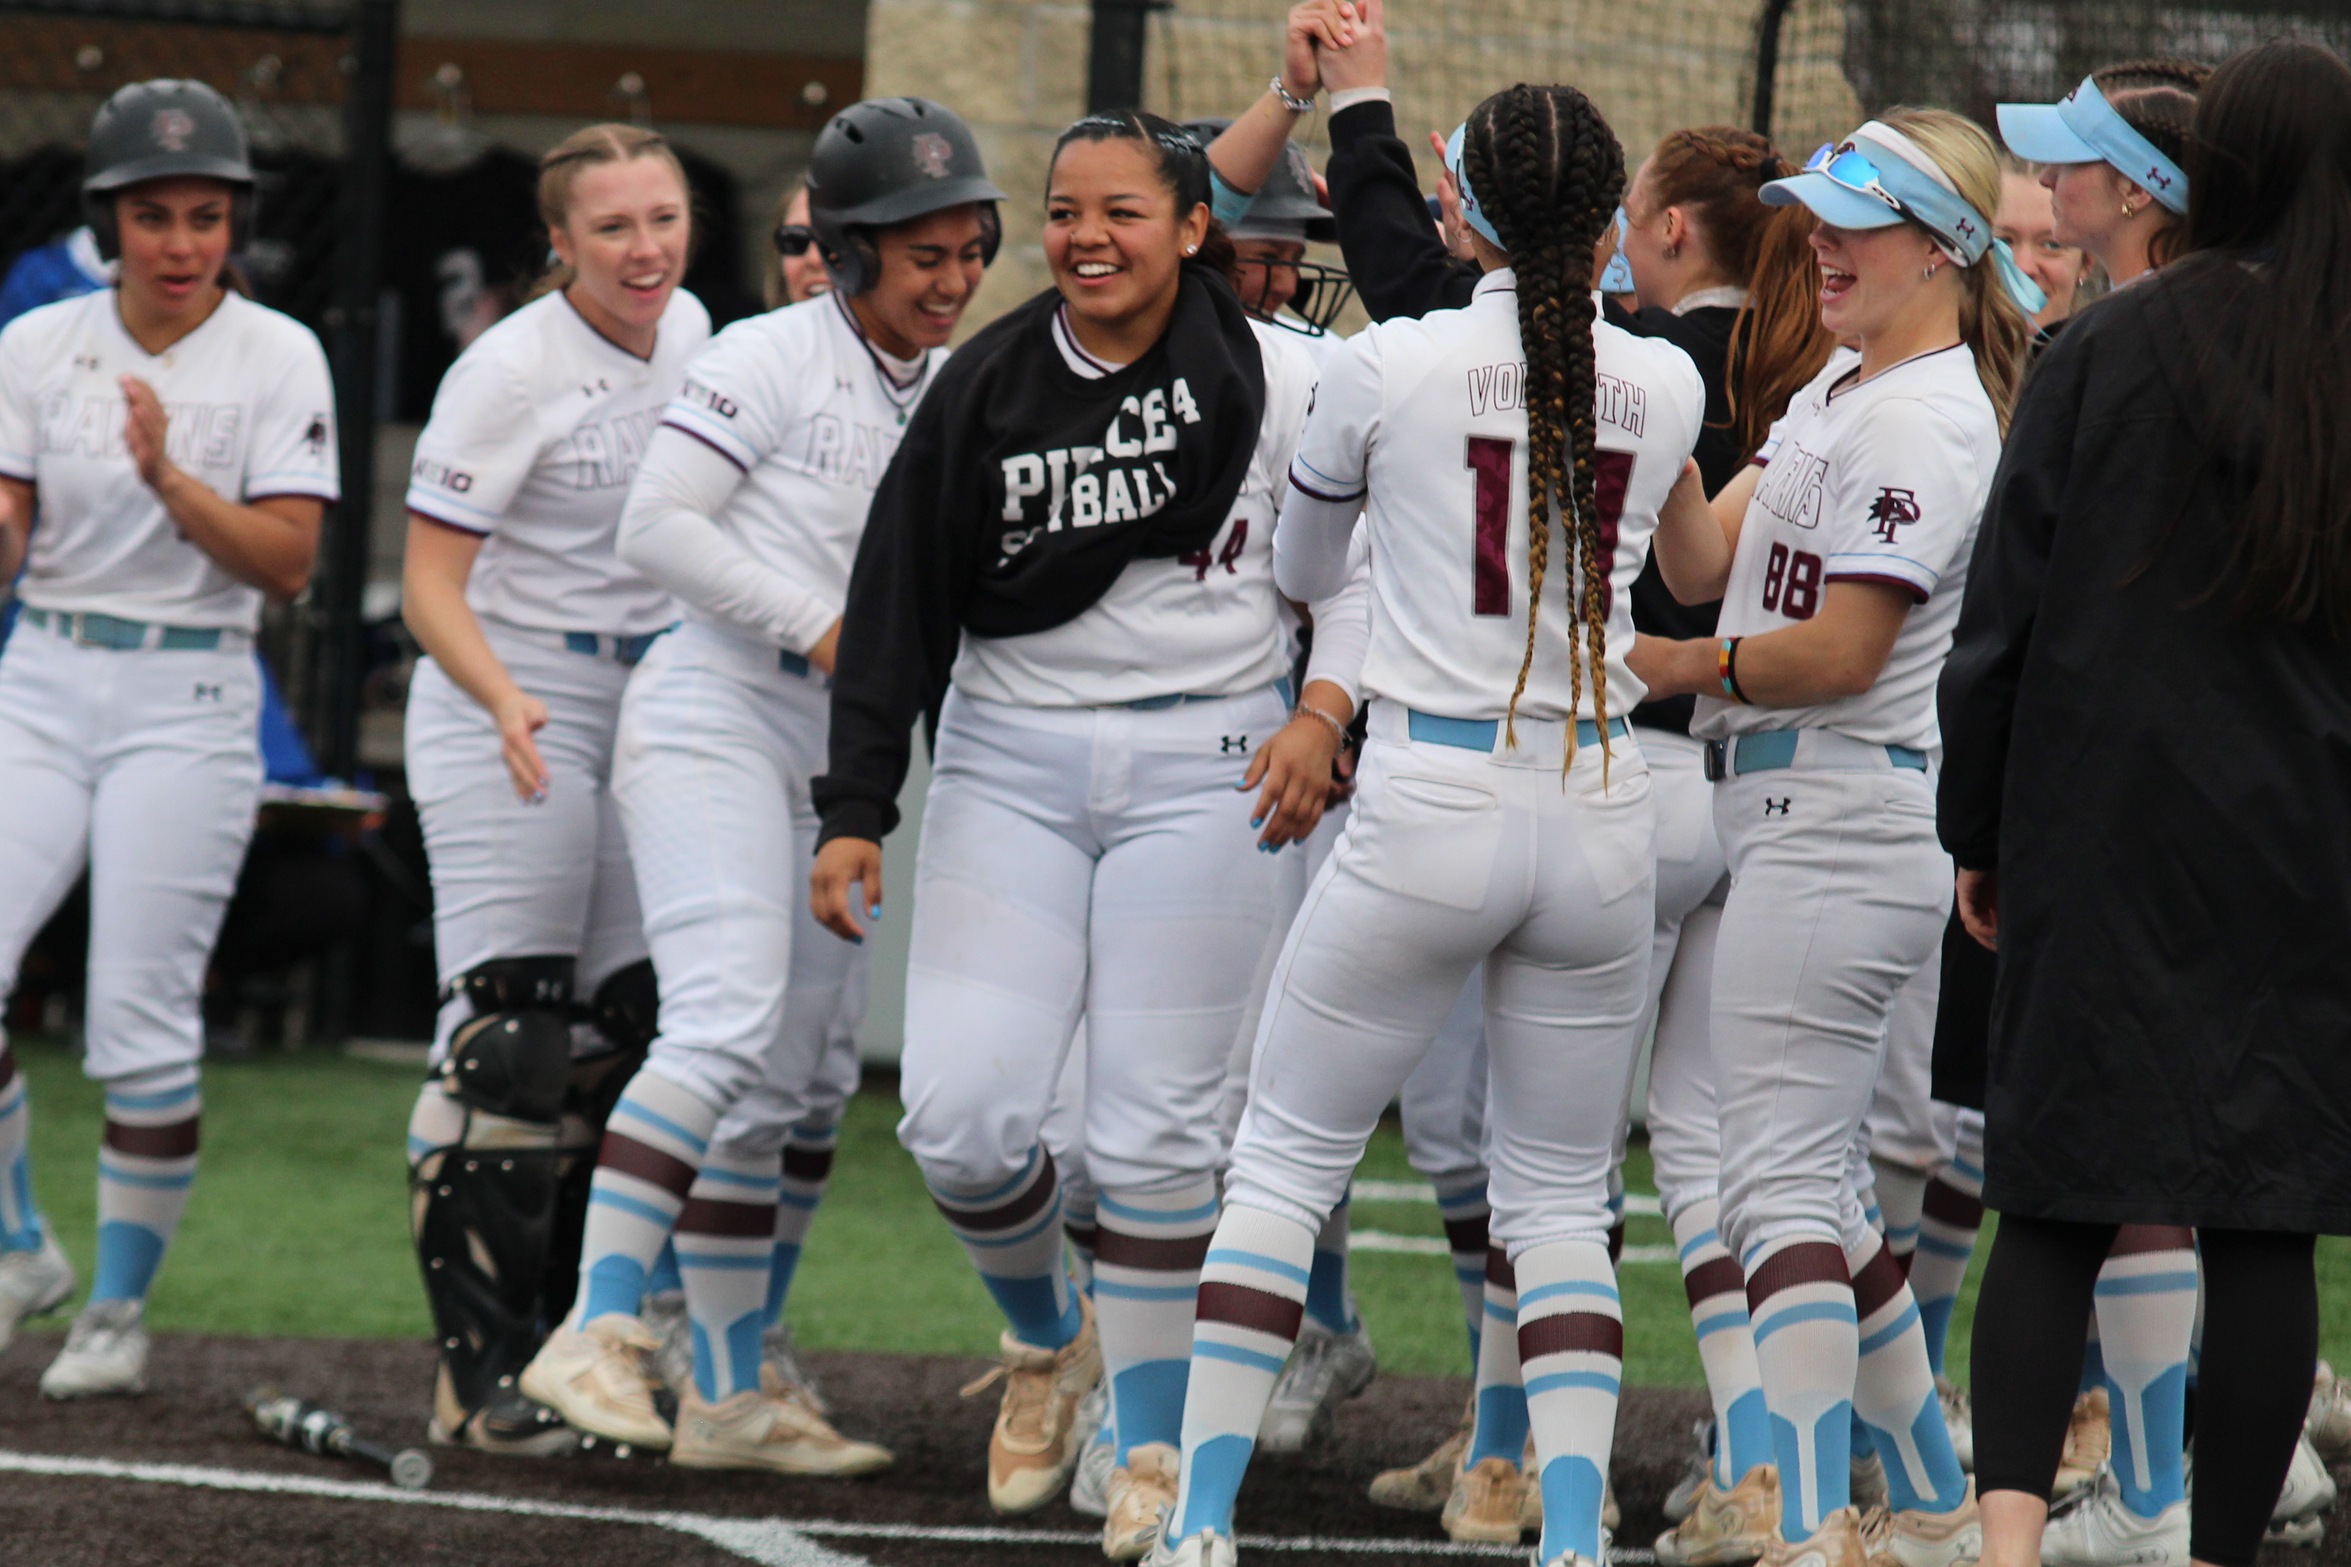 No. 6 Softball To Make Second Consecutive Appearance in NCAA East Regional Tournament